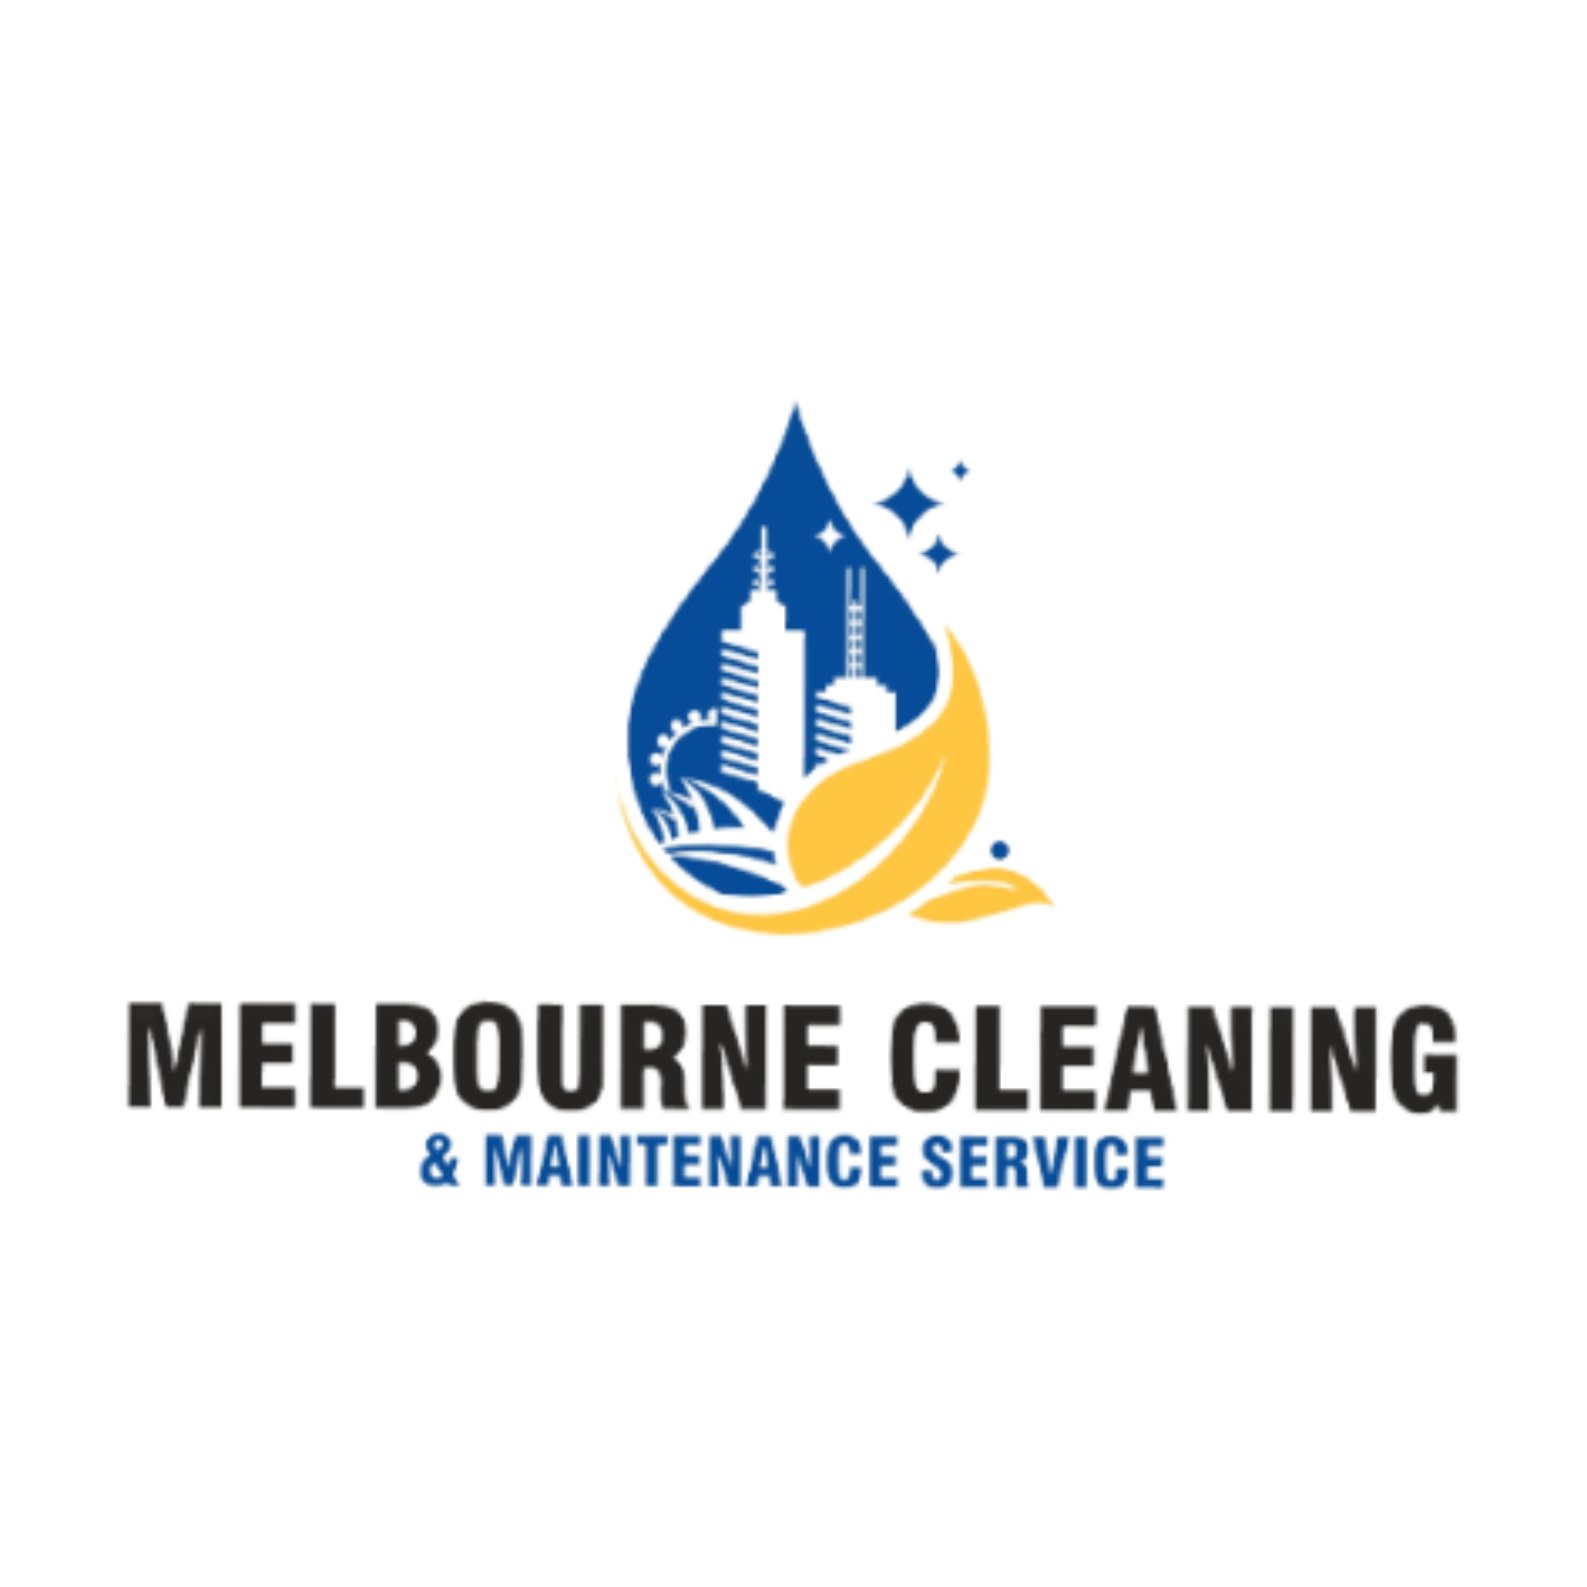 Melbourne Cleaning and Maintenance Services - Melbourne, VIC, Australia